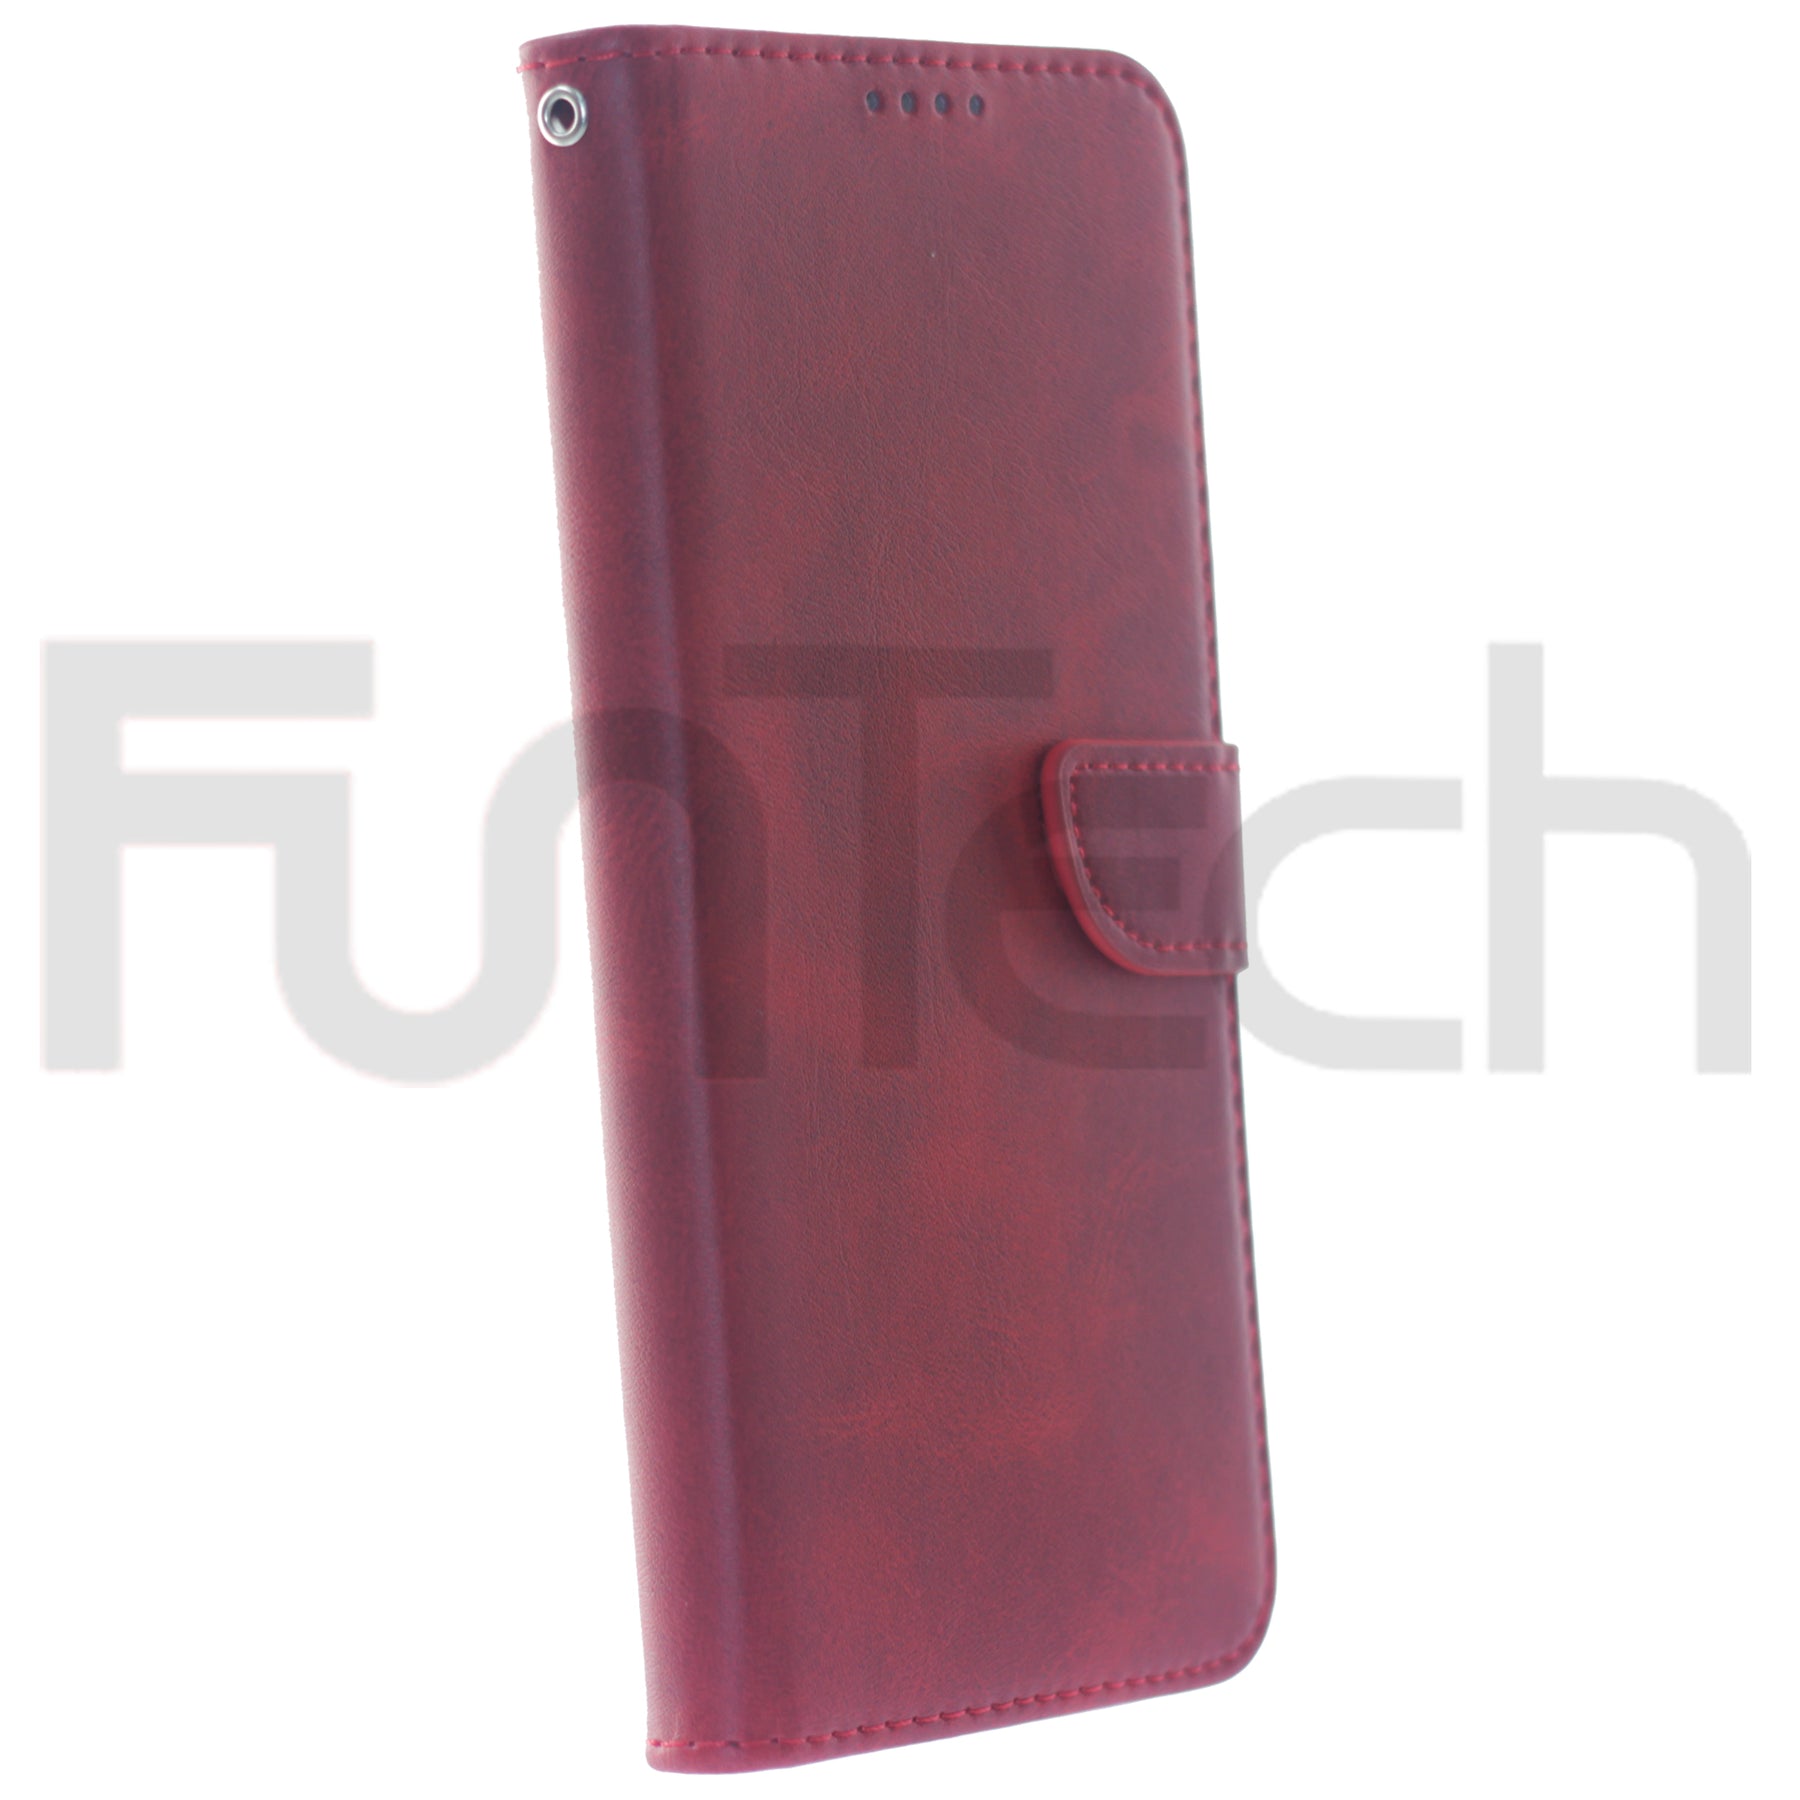 Oppo Find X3 Light 5G, Leather Wallet Case, Color Red.